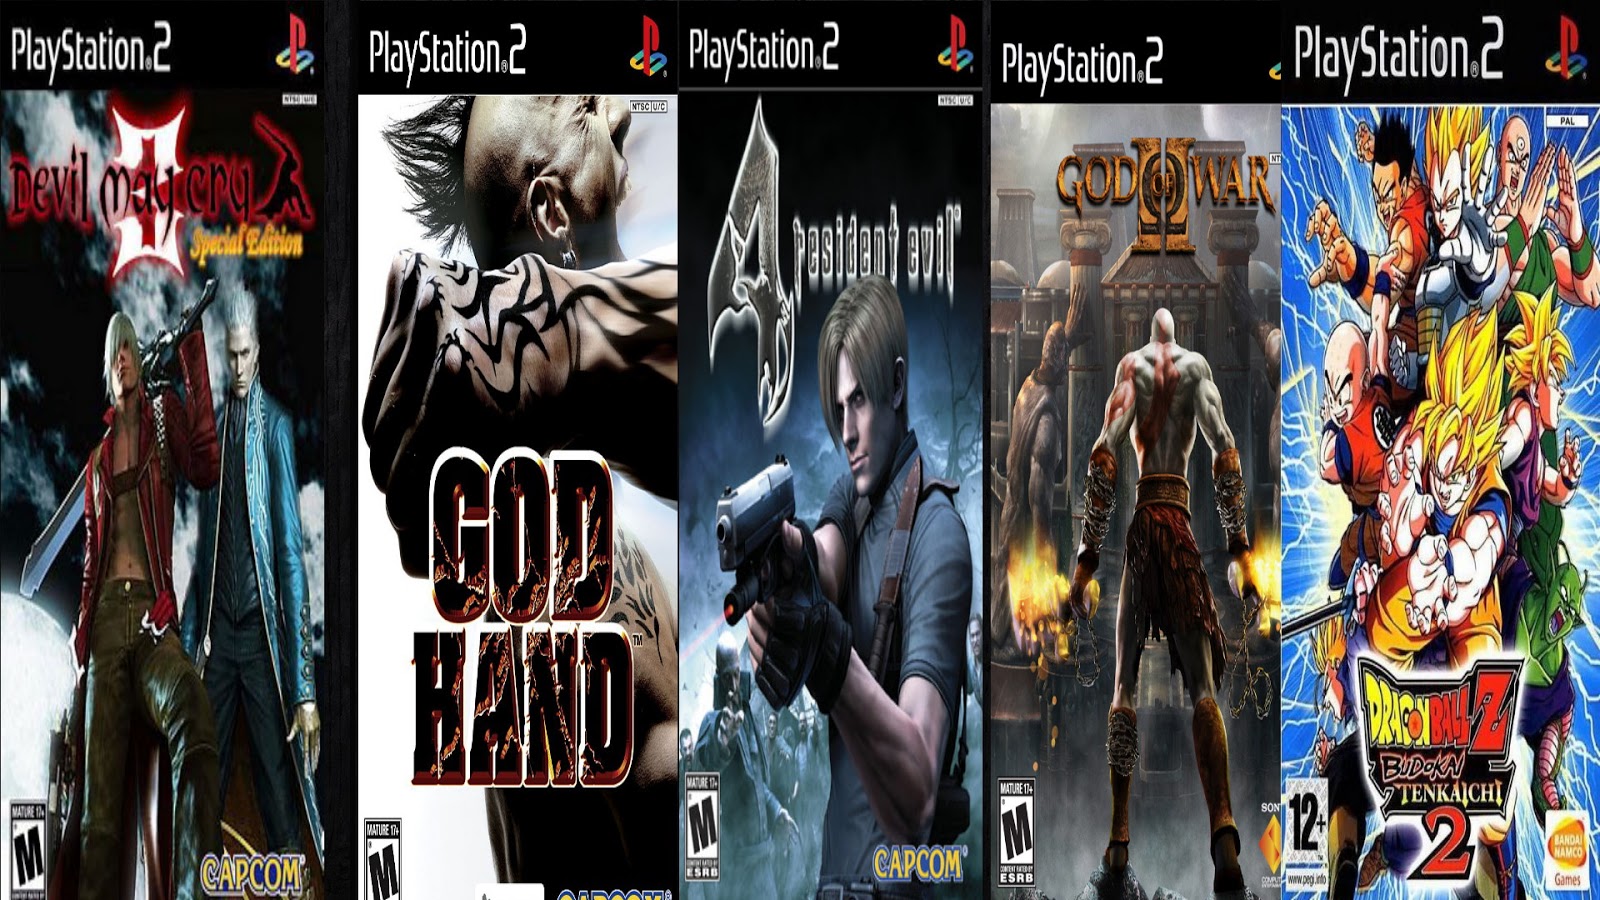 Download game emulator ps2 android